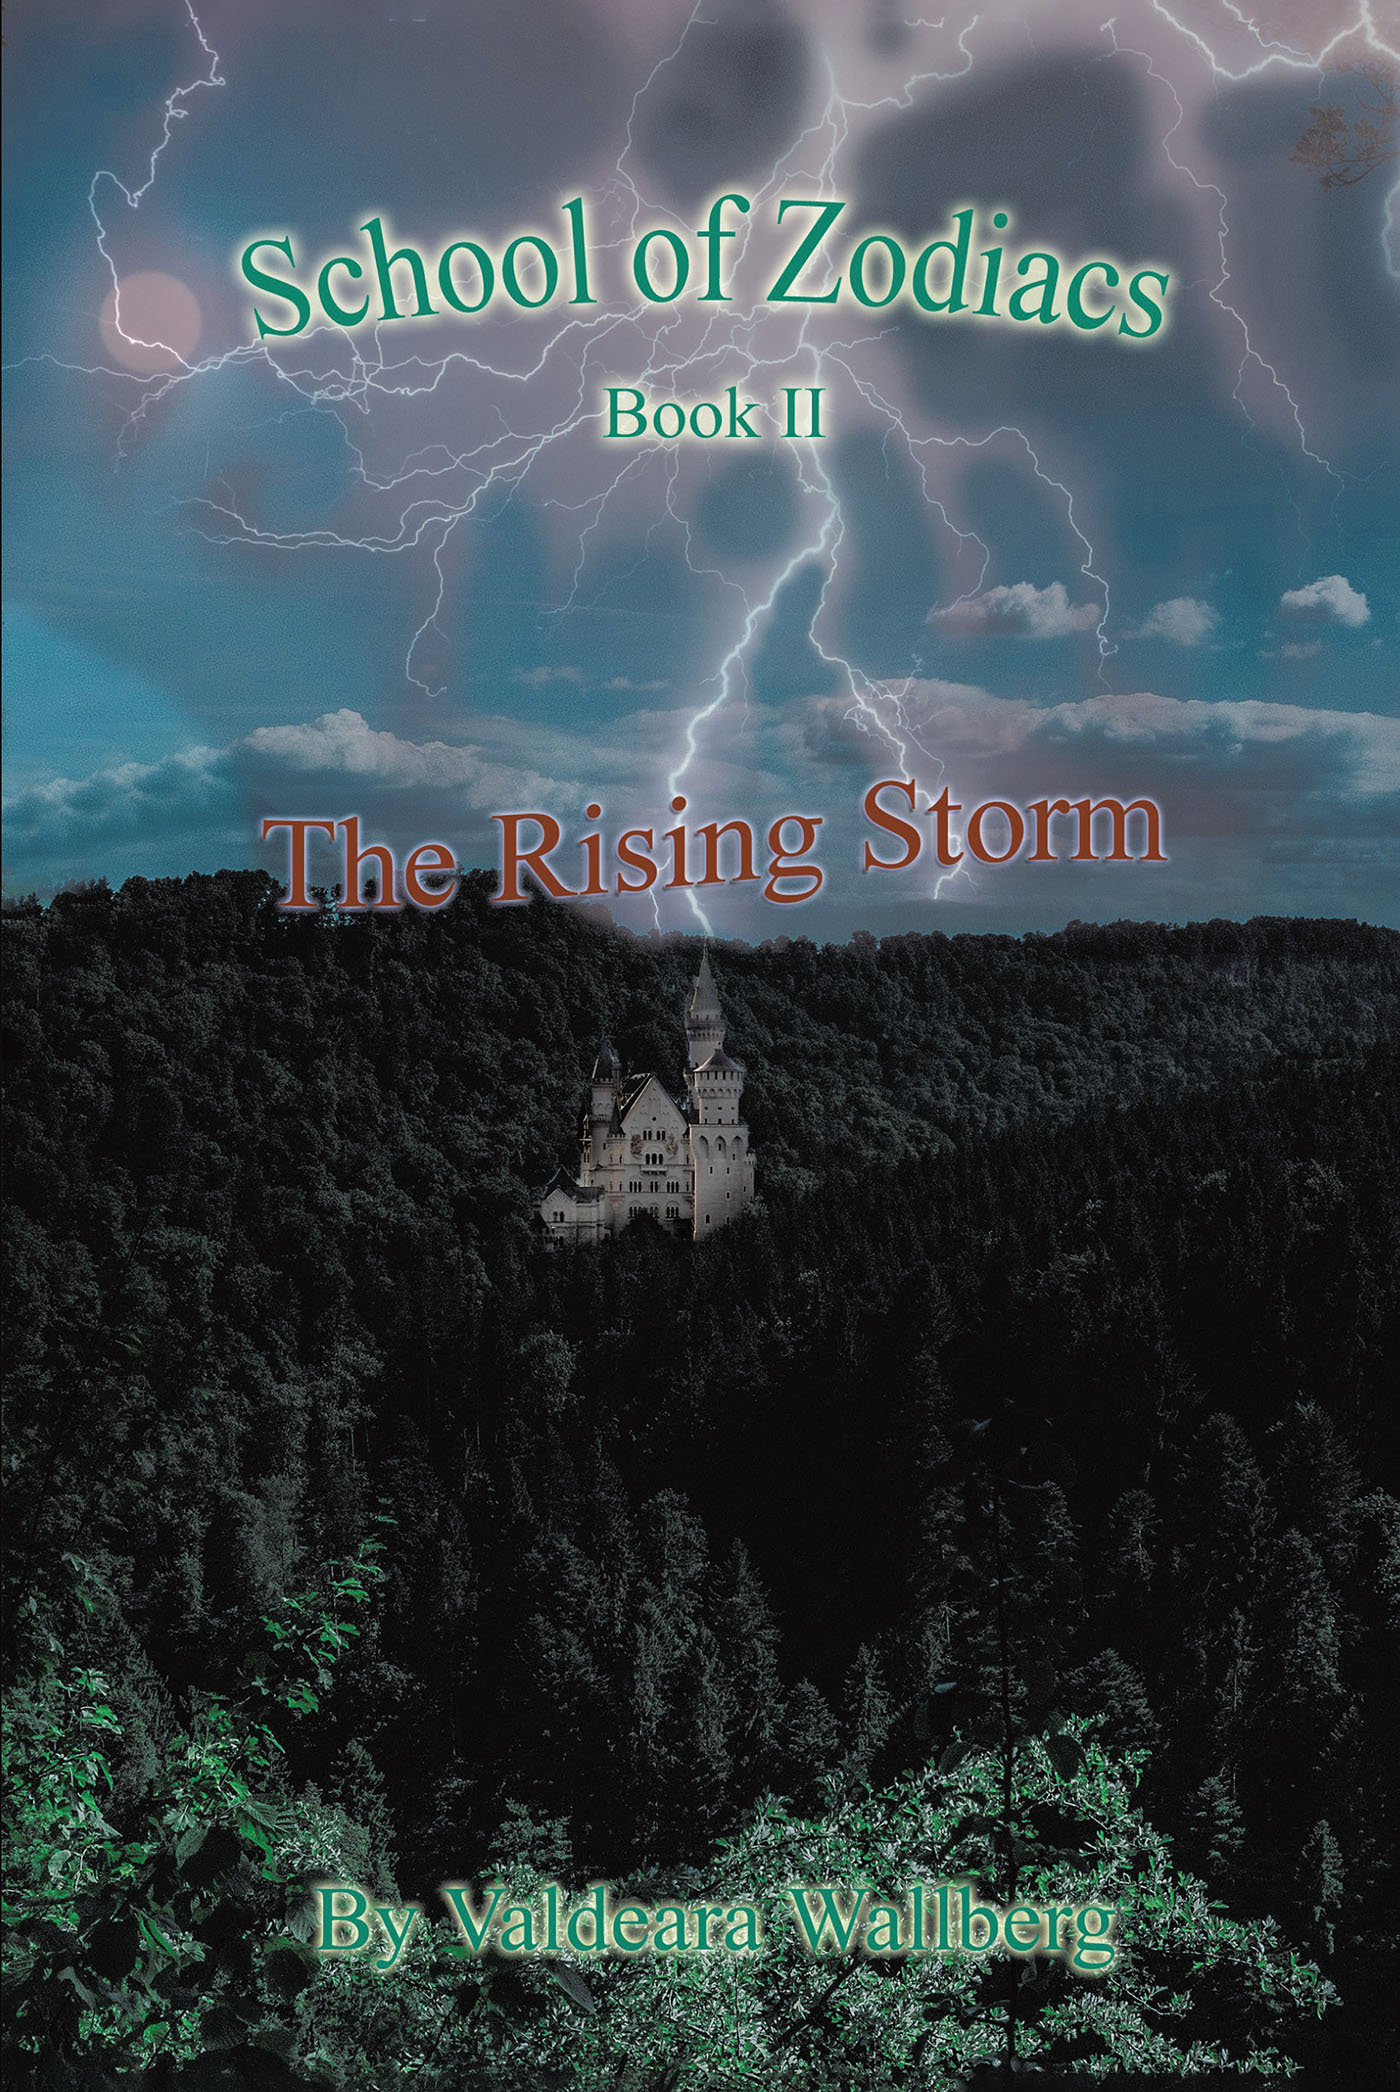 Valdeara Wallberg’s New Book, “School of Zodiacs: Book II: The Rising Storm,” is a Spellbinding Fantasy Novel Set at an Ancient and Mysterious School